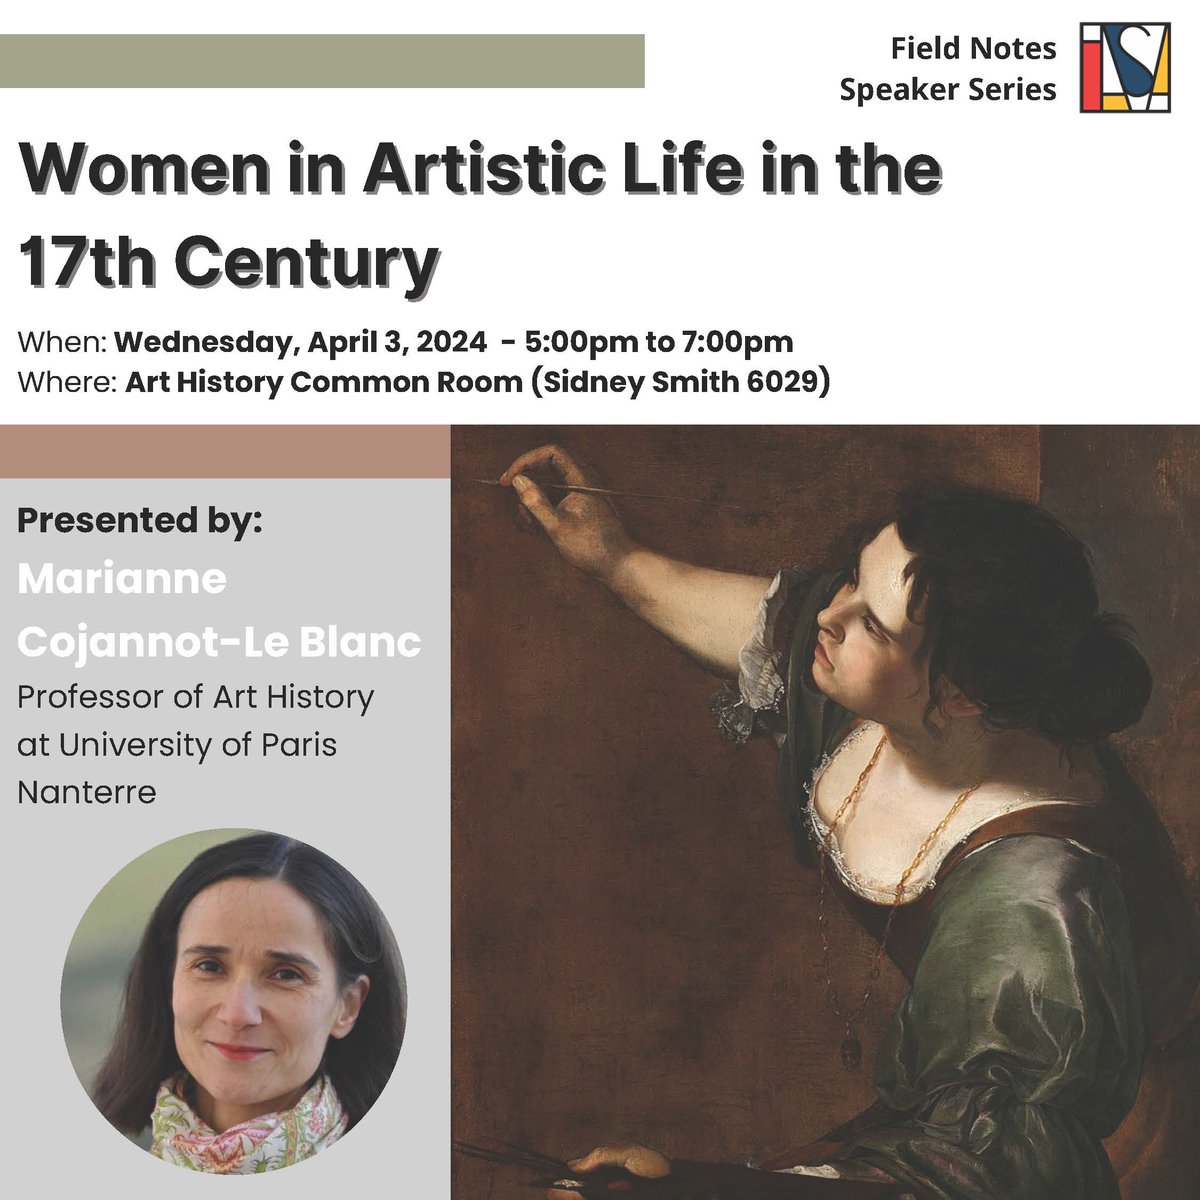 TODAY: HASA presents ‘Women in Artistic Life in the 17th Century’ by Prof. Marianne Cojannot-Le Blanc from Uni Paris Nanterre! 🇫🇷 Join HASA for Field Notes! All are welcome! When: TODAY at 5-7 PM ET Where: Art History Common Room (SS 6029) Details: arthistory.utoronto.ca/events/hasa-fi…